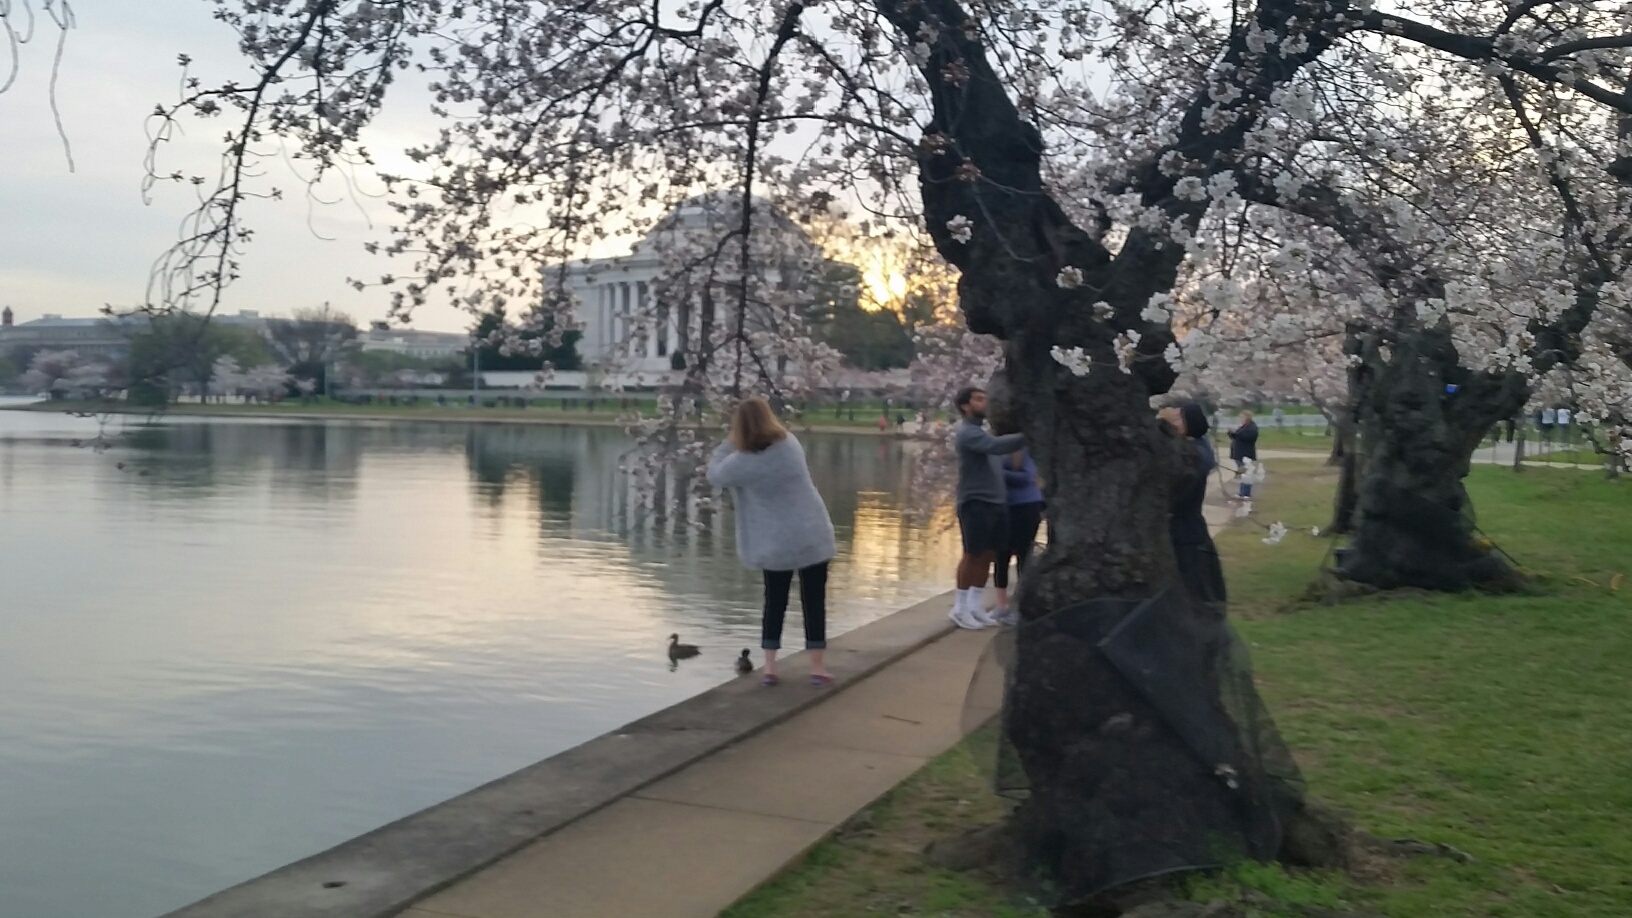 A visitor takes pictures of the cherry blossoms on the morning of March 23, 2016. (WTOP/Kathy Stewart)